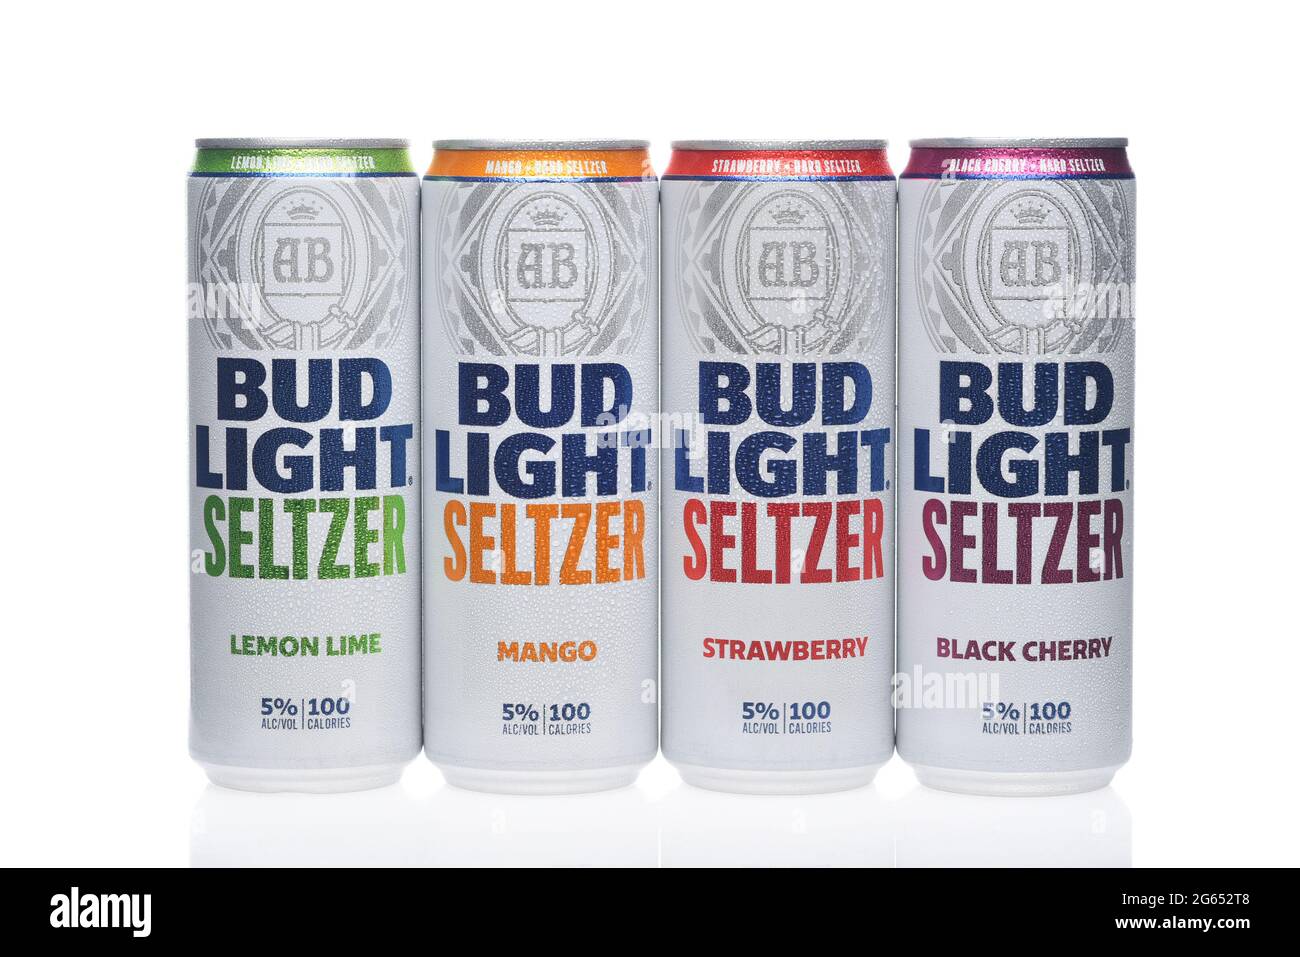 IRIVNE, CAIFORNIA - 2 JULY 2021: Bud Light Seltzer. Four cans, Lemon Lime, Mango, Strawberry and Black Cherry flavors on white. Stock Photo